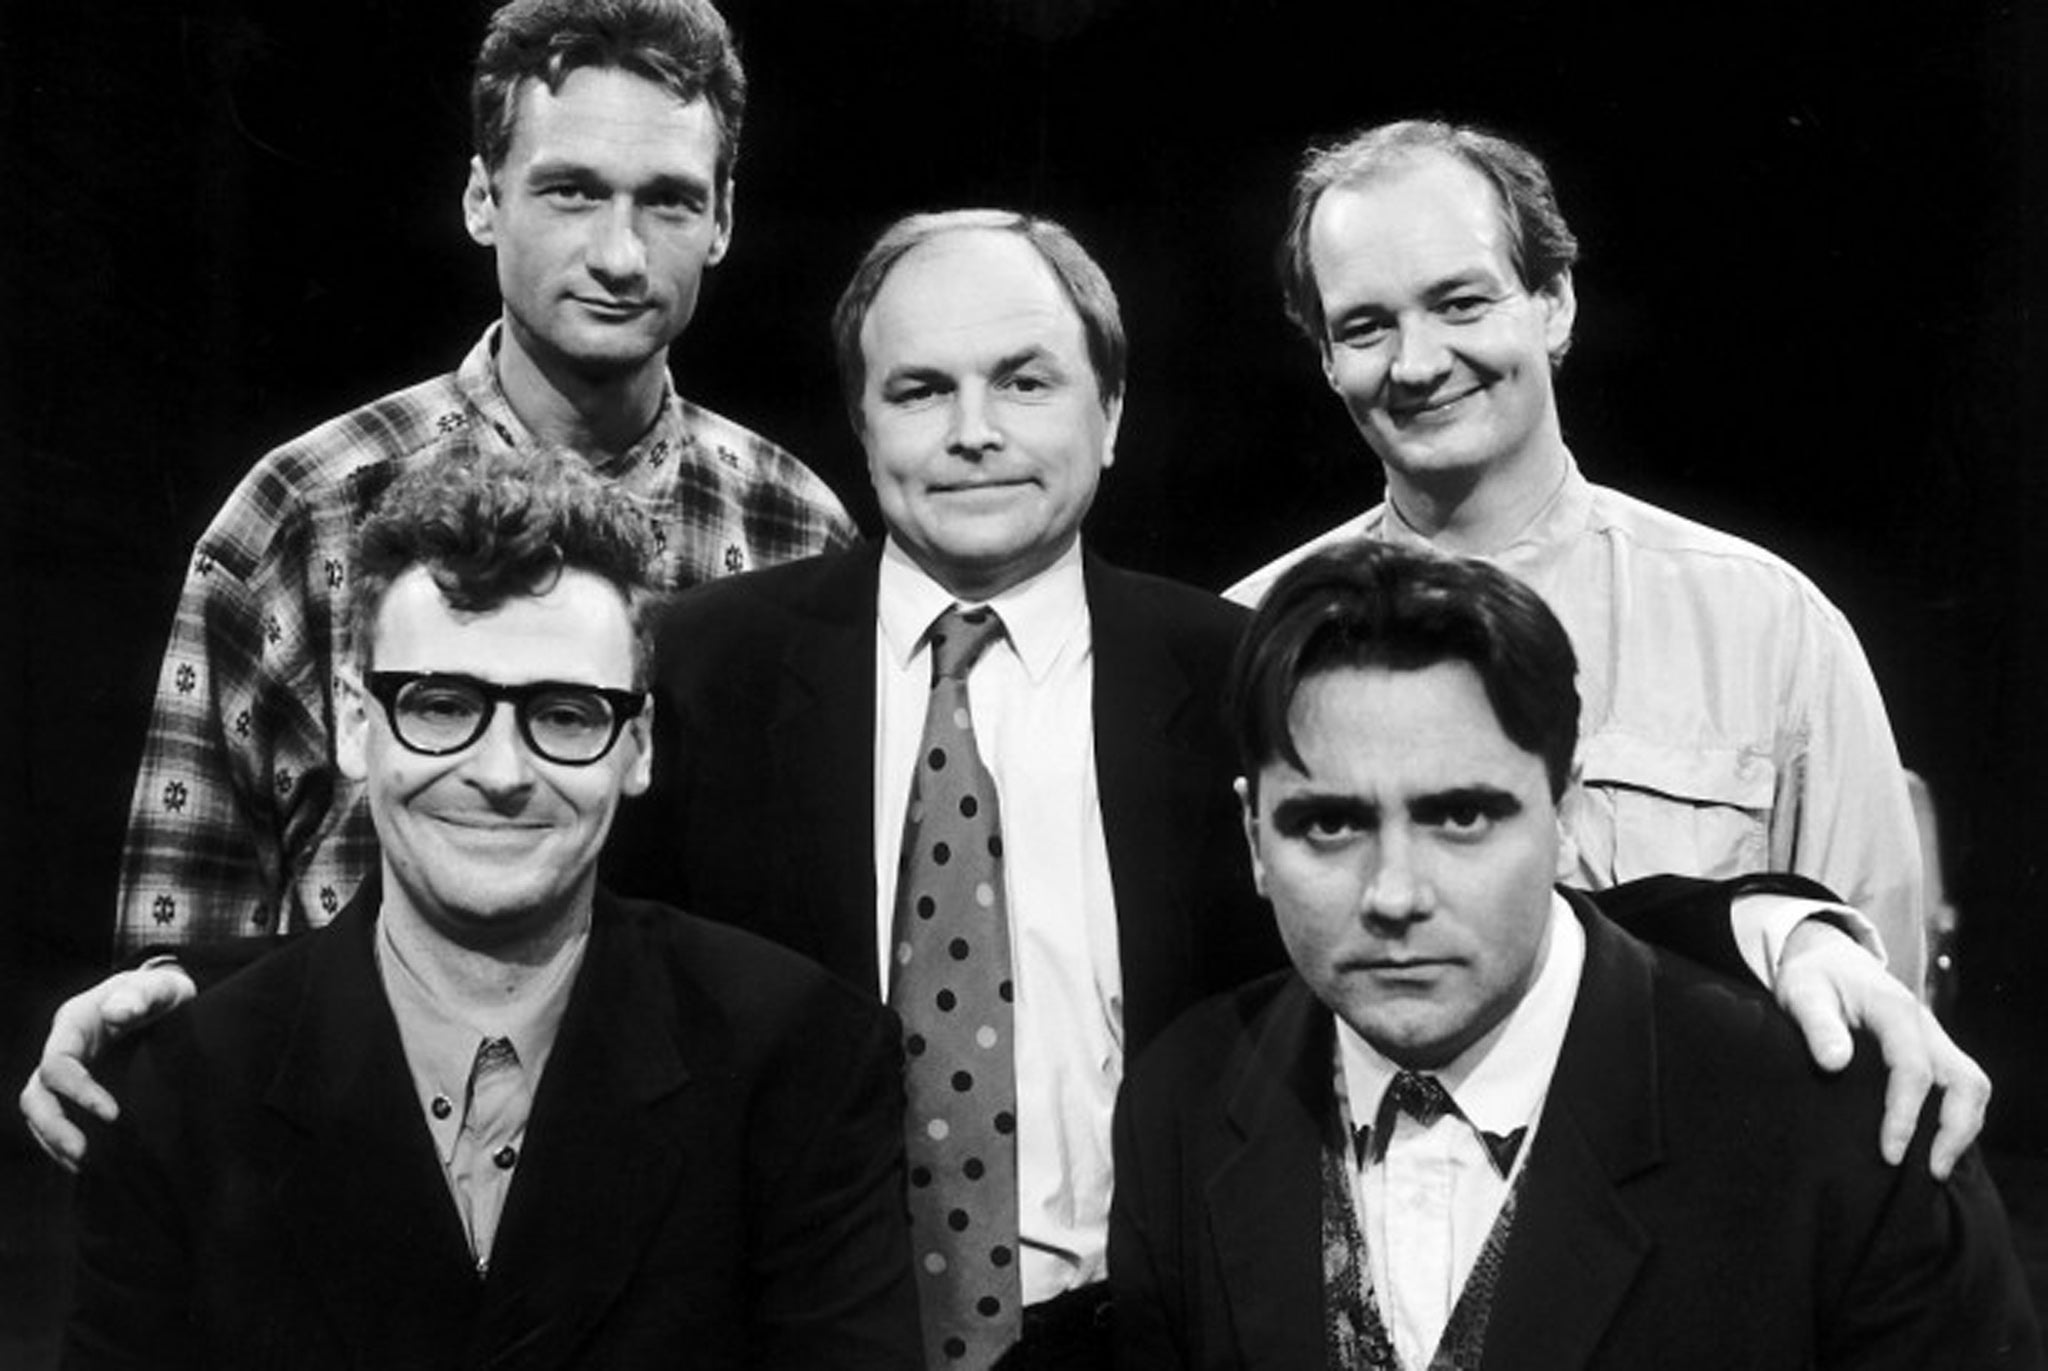 Clive Anderson, Greg Proops, Tony Slattery and Ryan Stiles in the Channel 4 series Whose Line Is It Anyway?